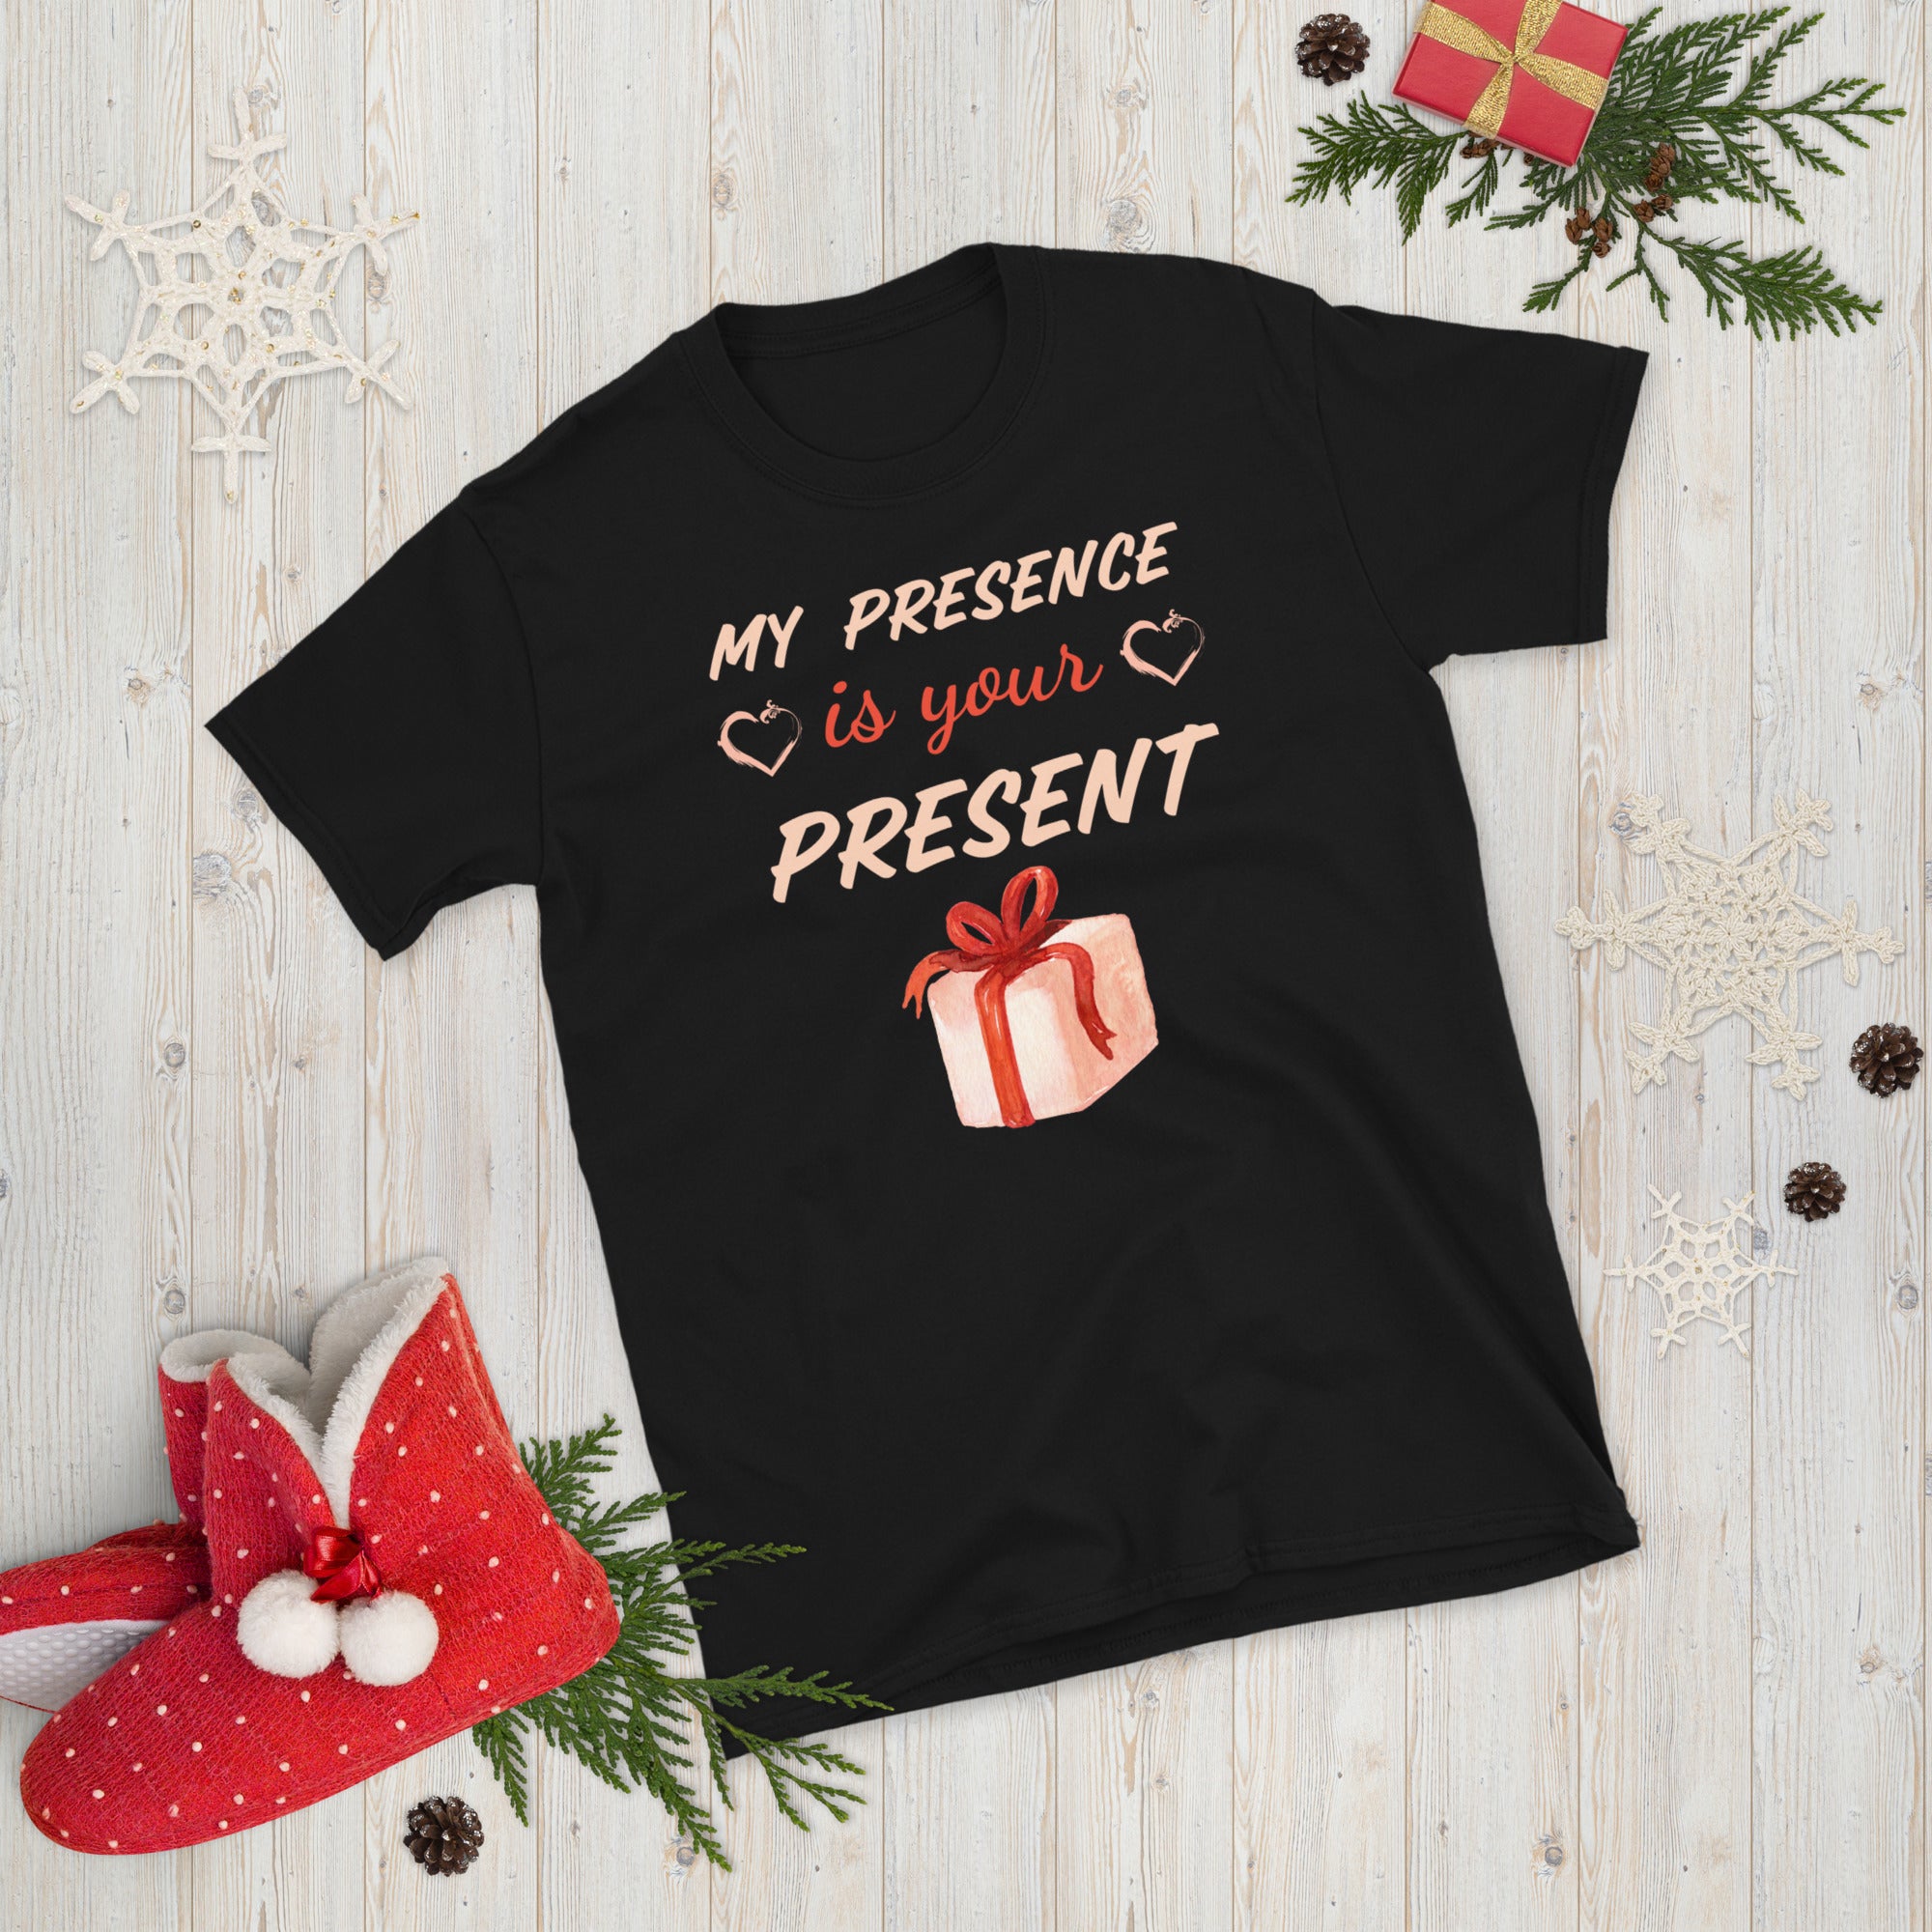 My Presence Is Your Present Shirt,Christmas Shirt for Women,Merry and Bright, Funny Xmas Shirt,Cute Party Shirt, New Year Tee, Xmas Pajamas